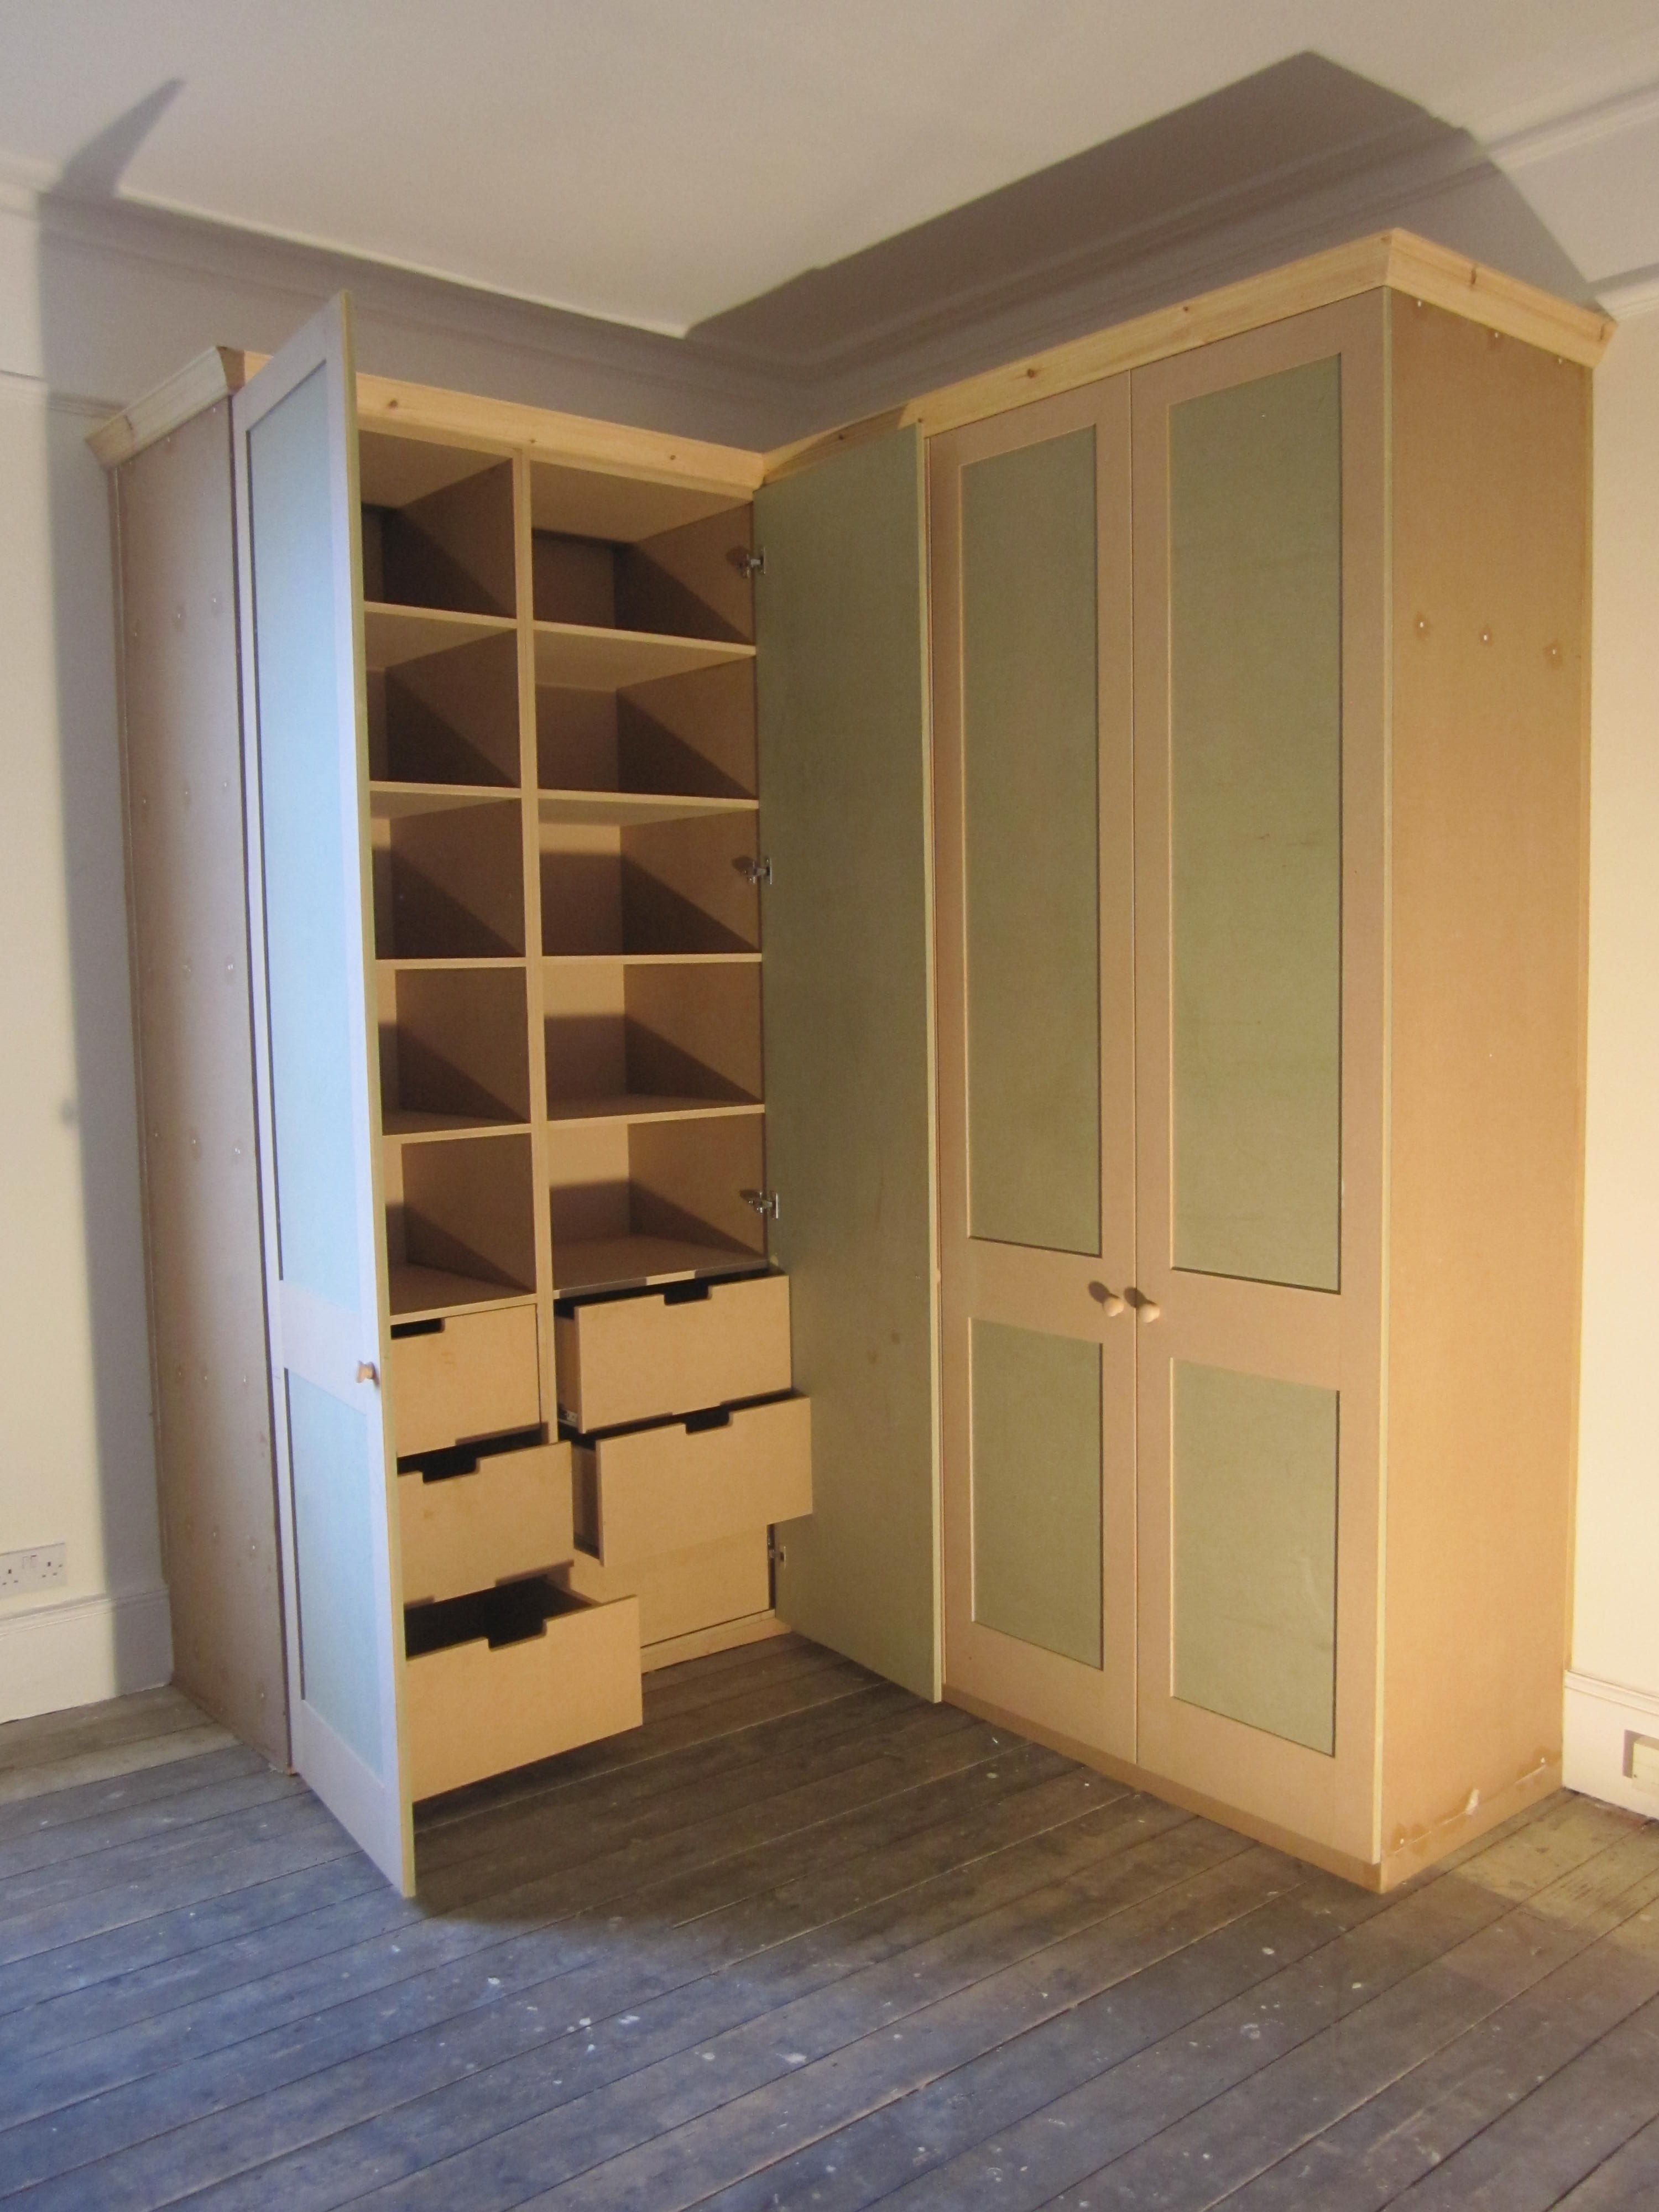 For Idea Of Drawer Shape Only Closets Pinterest Drawers And For Wardrobe With Drawers And Shelves (View 15 of 15)